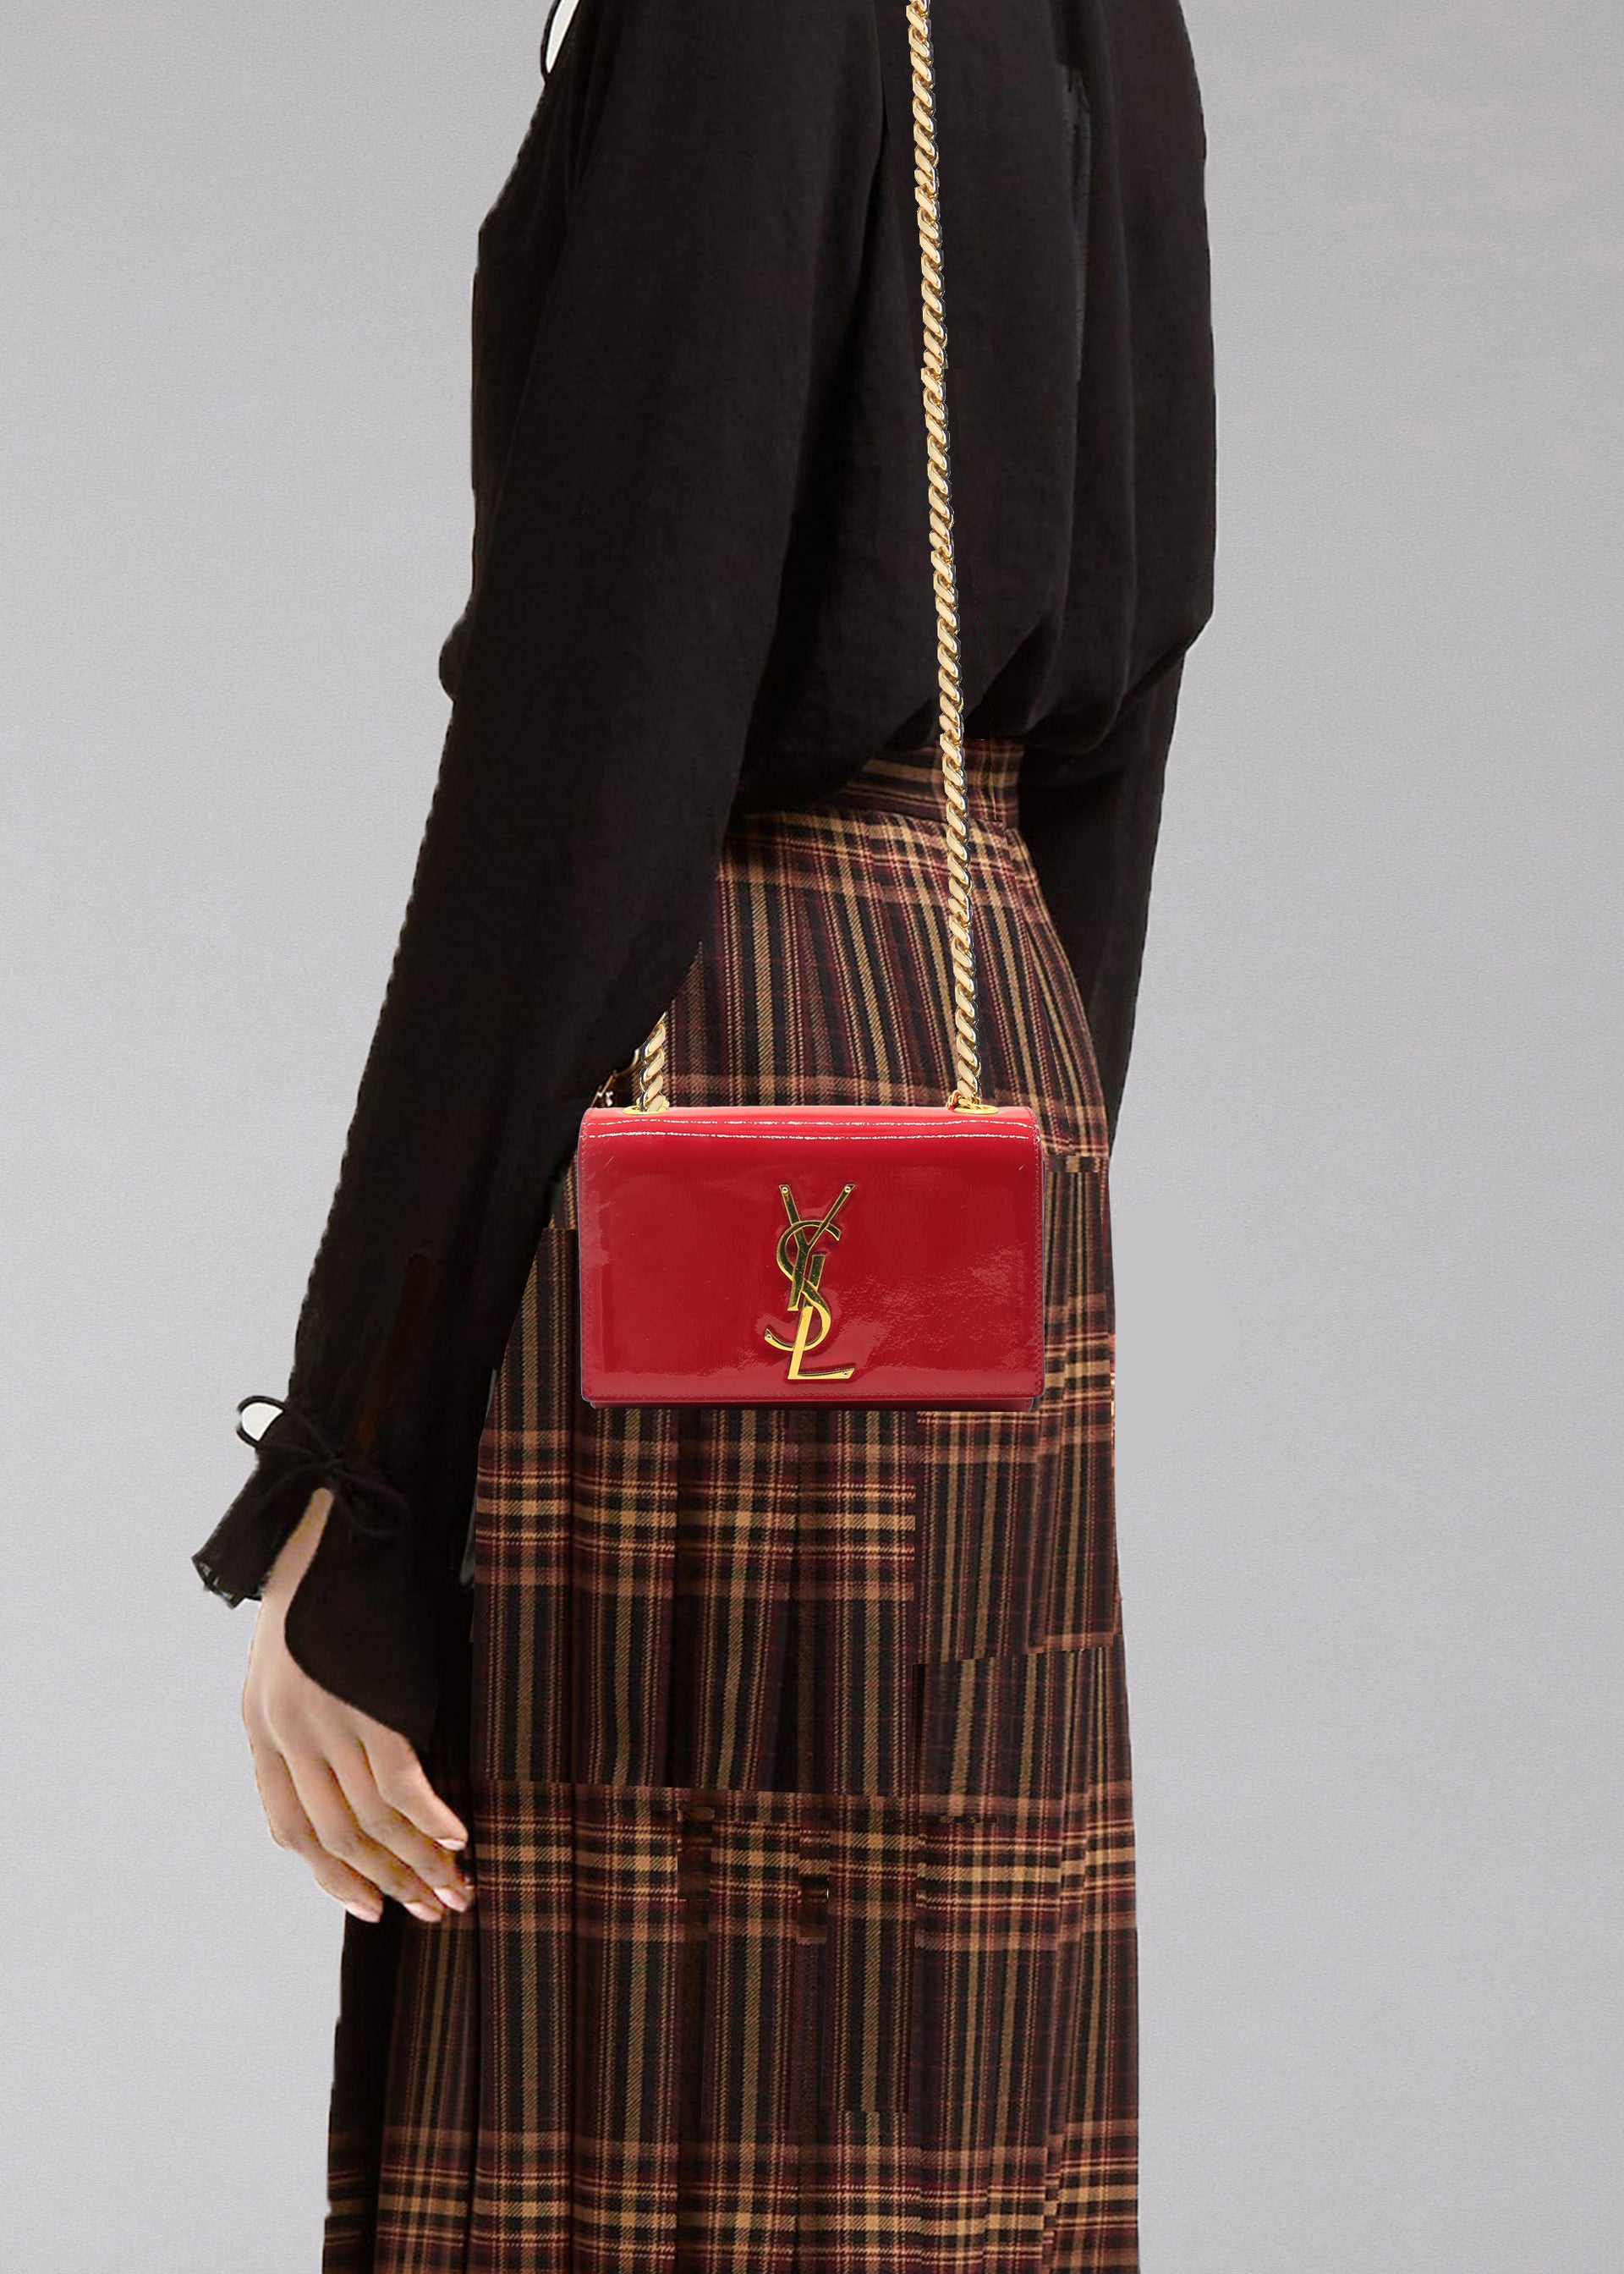 Saint Laurent Small Kate Bag in Red Patent Leather – STYLISHTOP